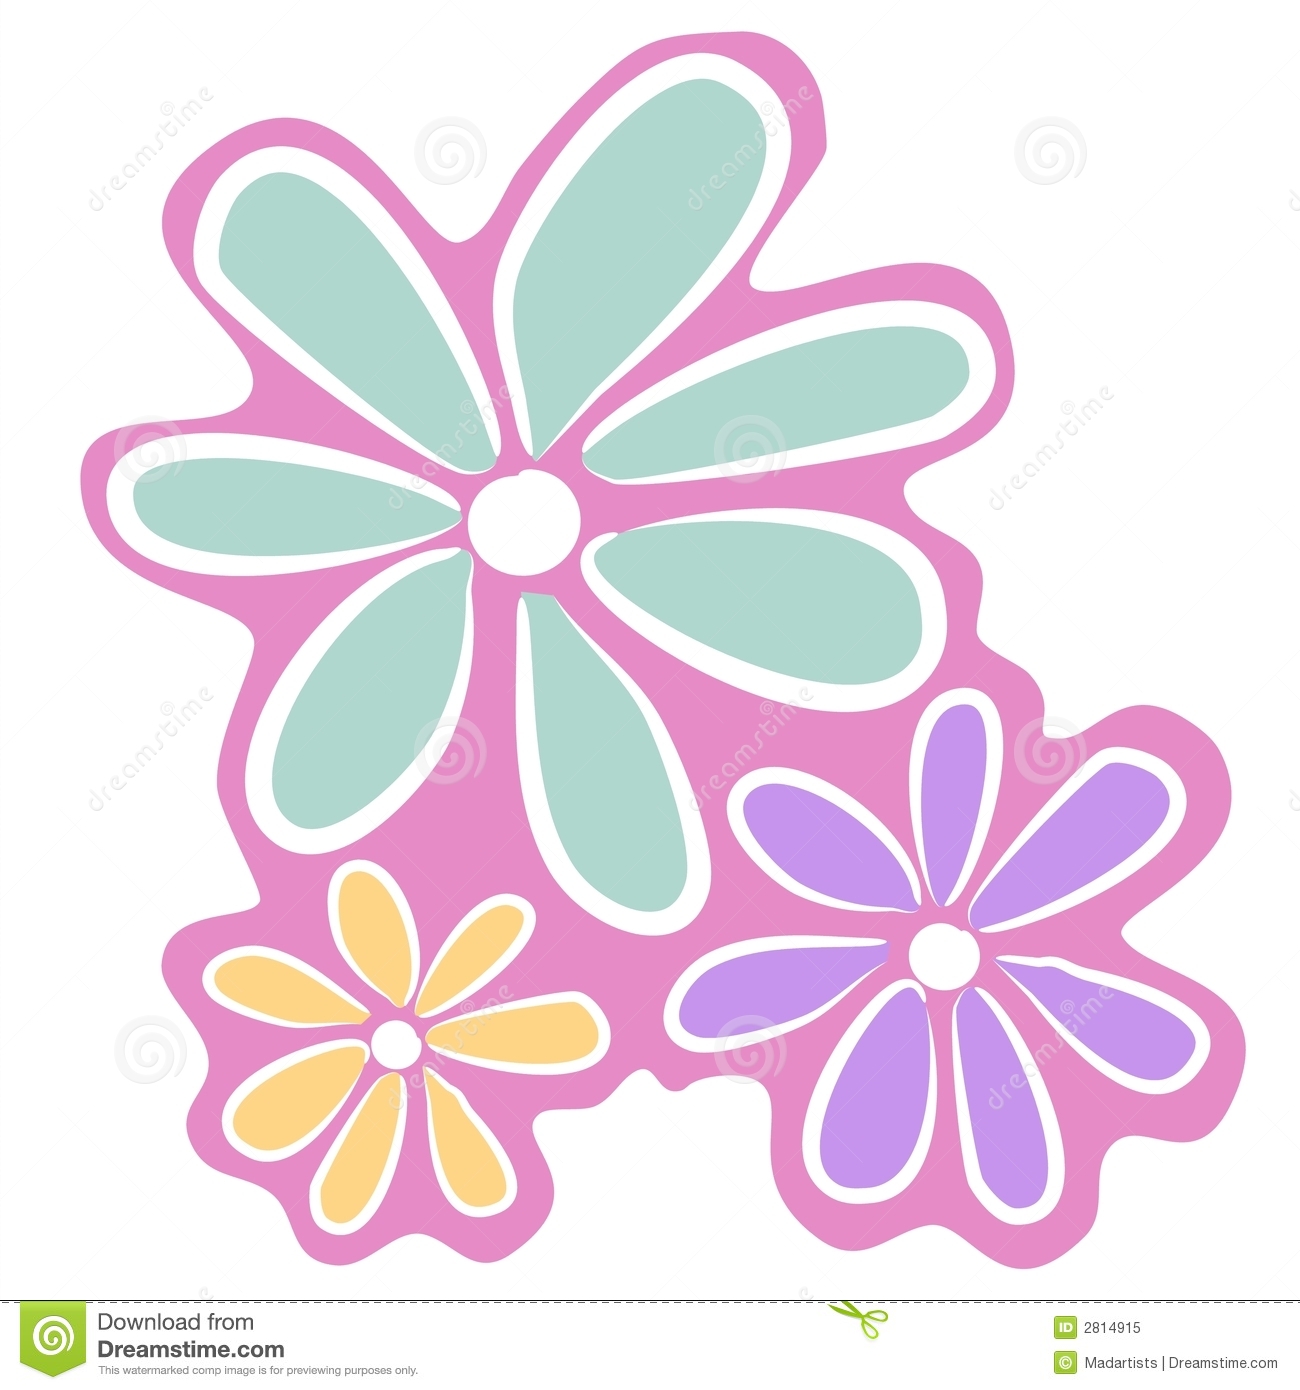     Colored Flowers   Blue Purple And Yellow On A Pink Fitted Background